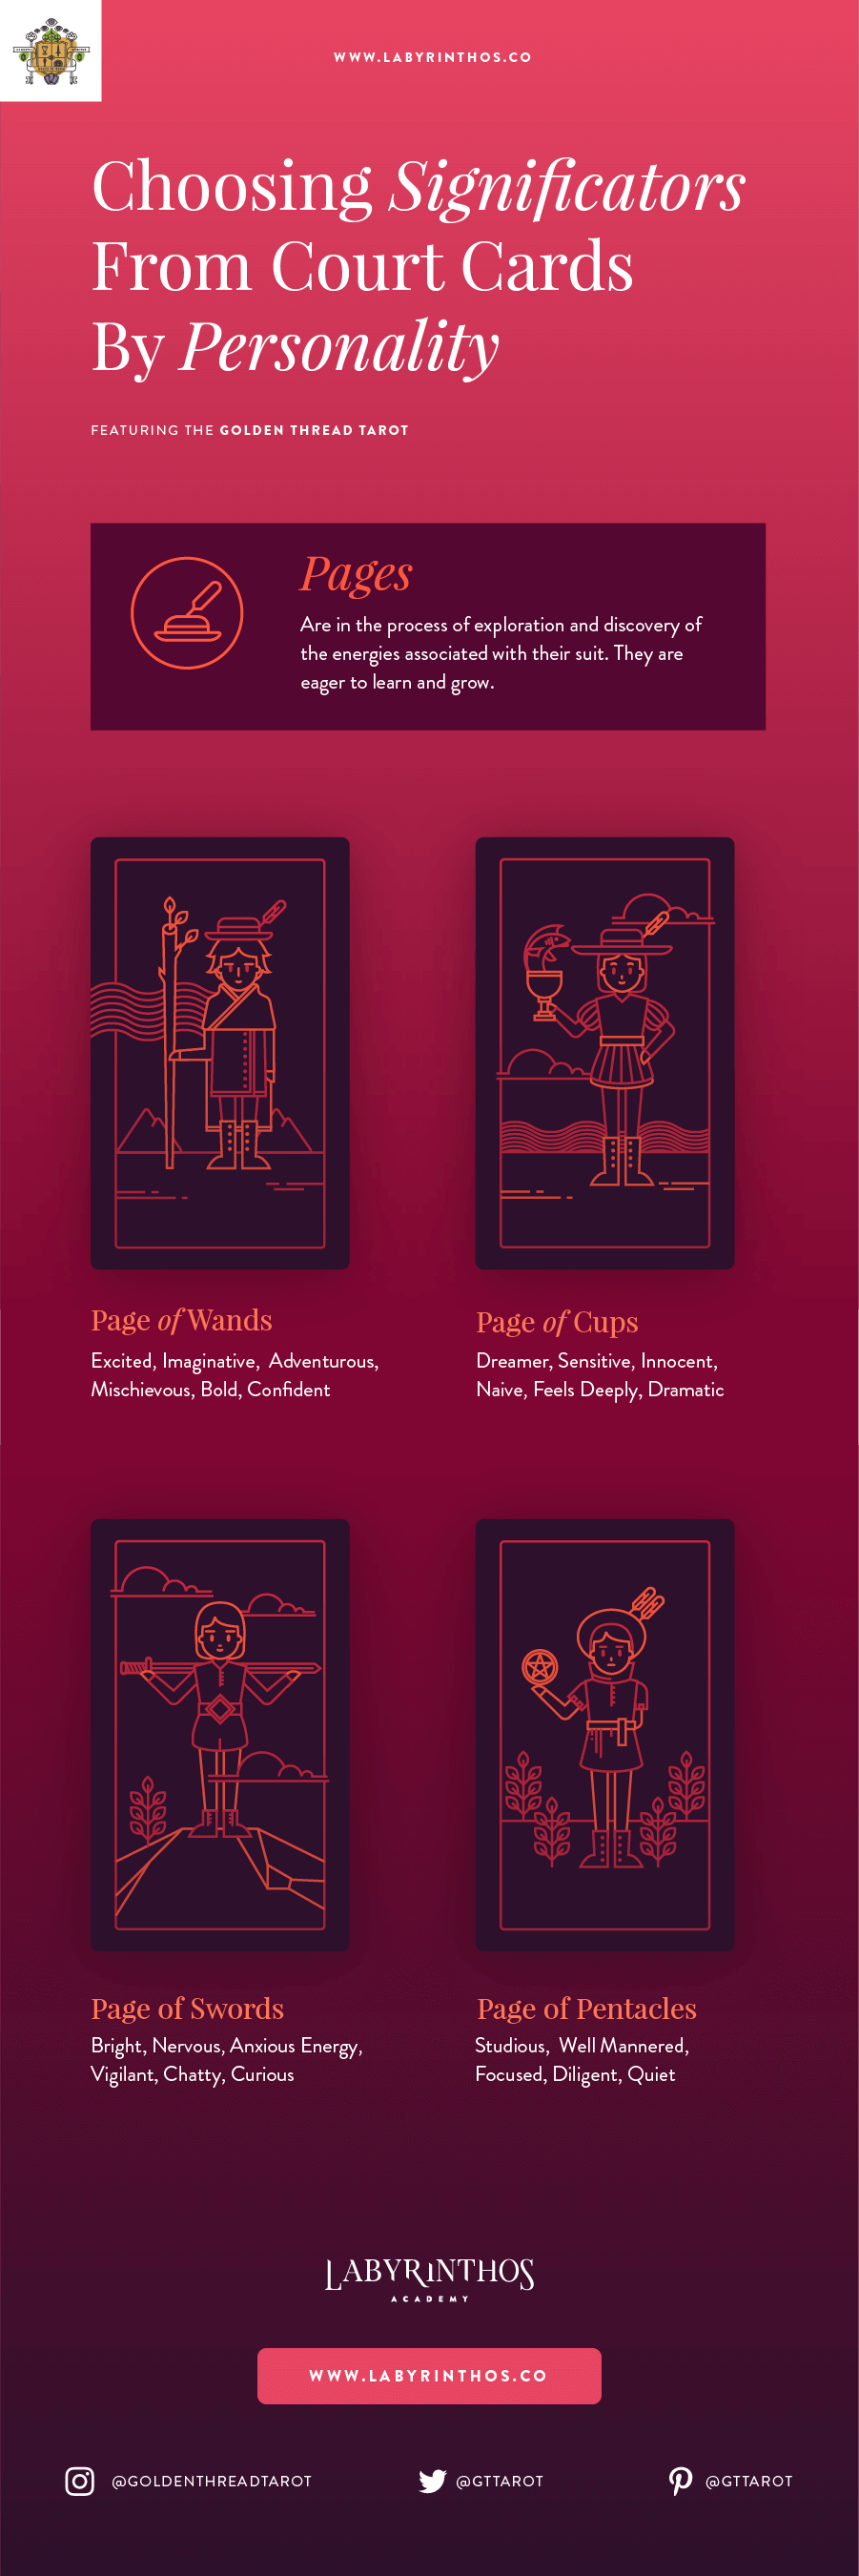 The Personalities of the Pages: Tarot Court Cards as Significators in Tarot